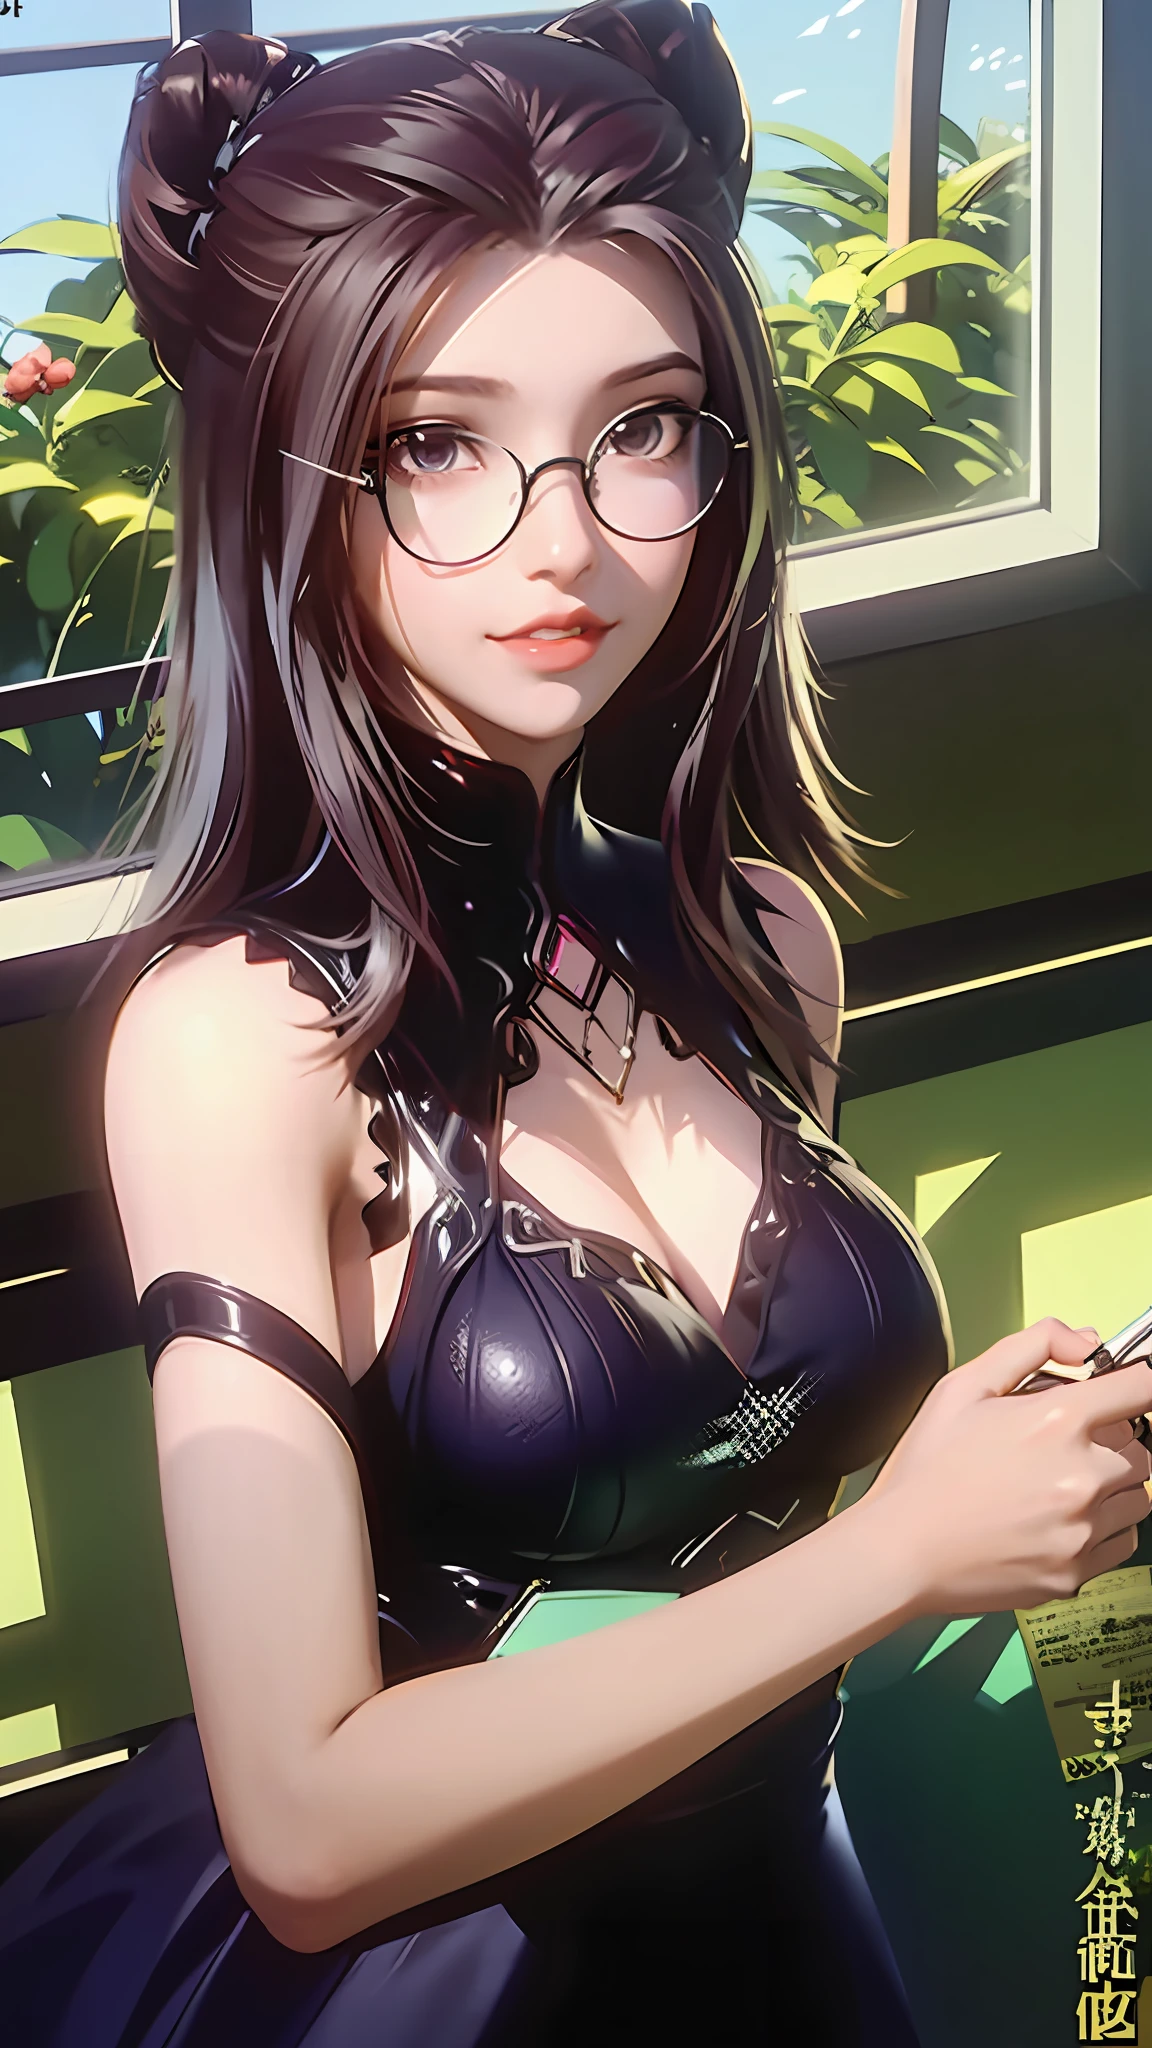 (character details + style) female teacher, (details) half-body, holding glasses frames, (lens effect + lighting + scene) light and shadow interlaced, by the window, the sun is warm, flowers are green, bookshelves are dazzling, students' desks are scattered with teaching stationery and textbooks, and the classroom air is fresh.